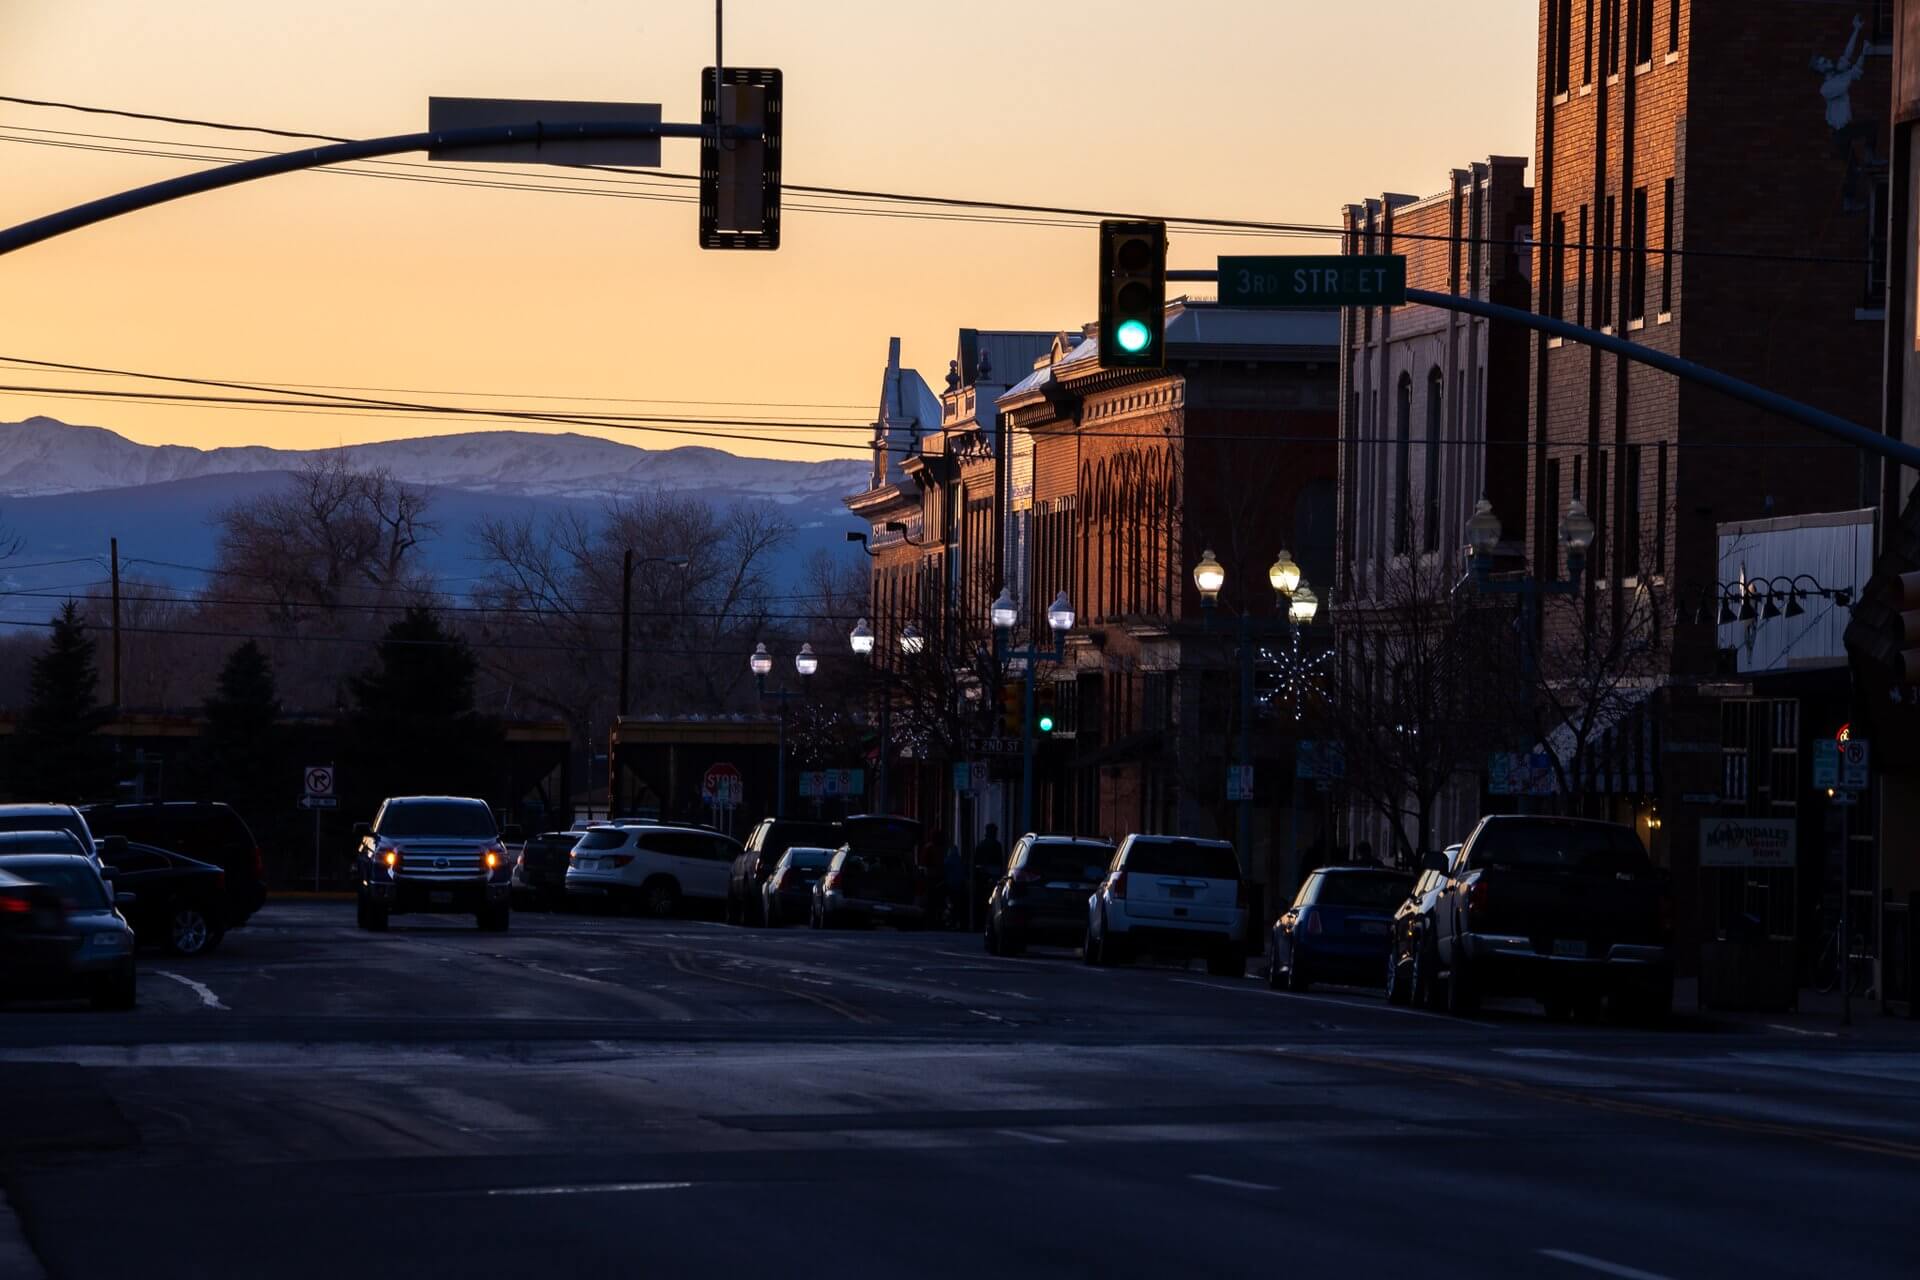 A golden sunset washes over the mountains in the city of Laramie as the traffic light glows green on the main street, where a car's lights blink in the distance. 